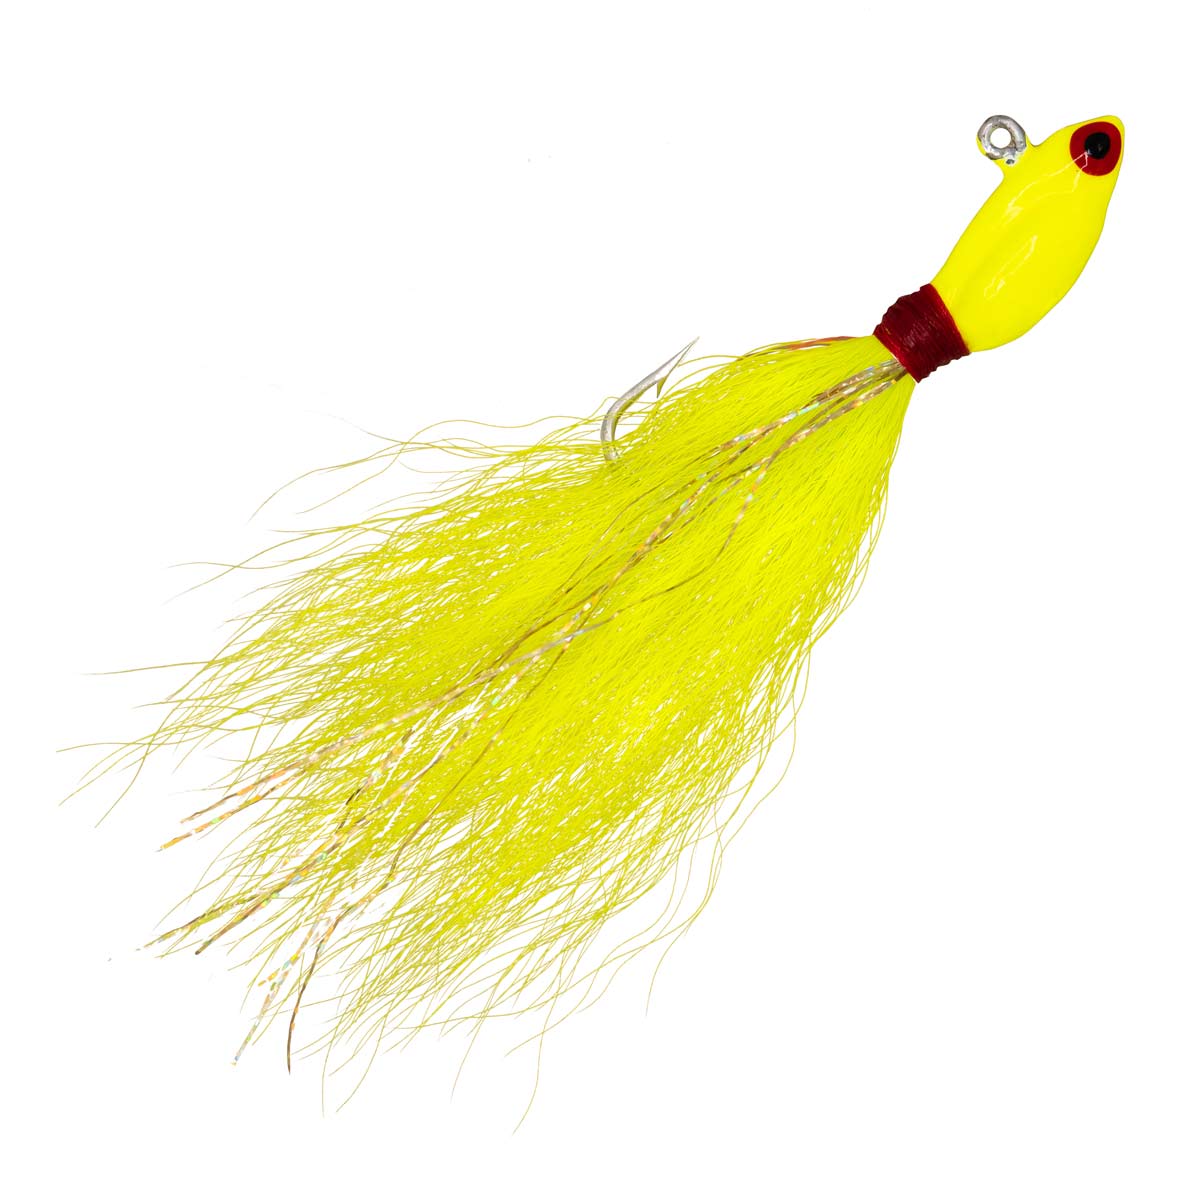 potbelly Bucktail Jig 3/8 oz Chartreuse